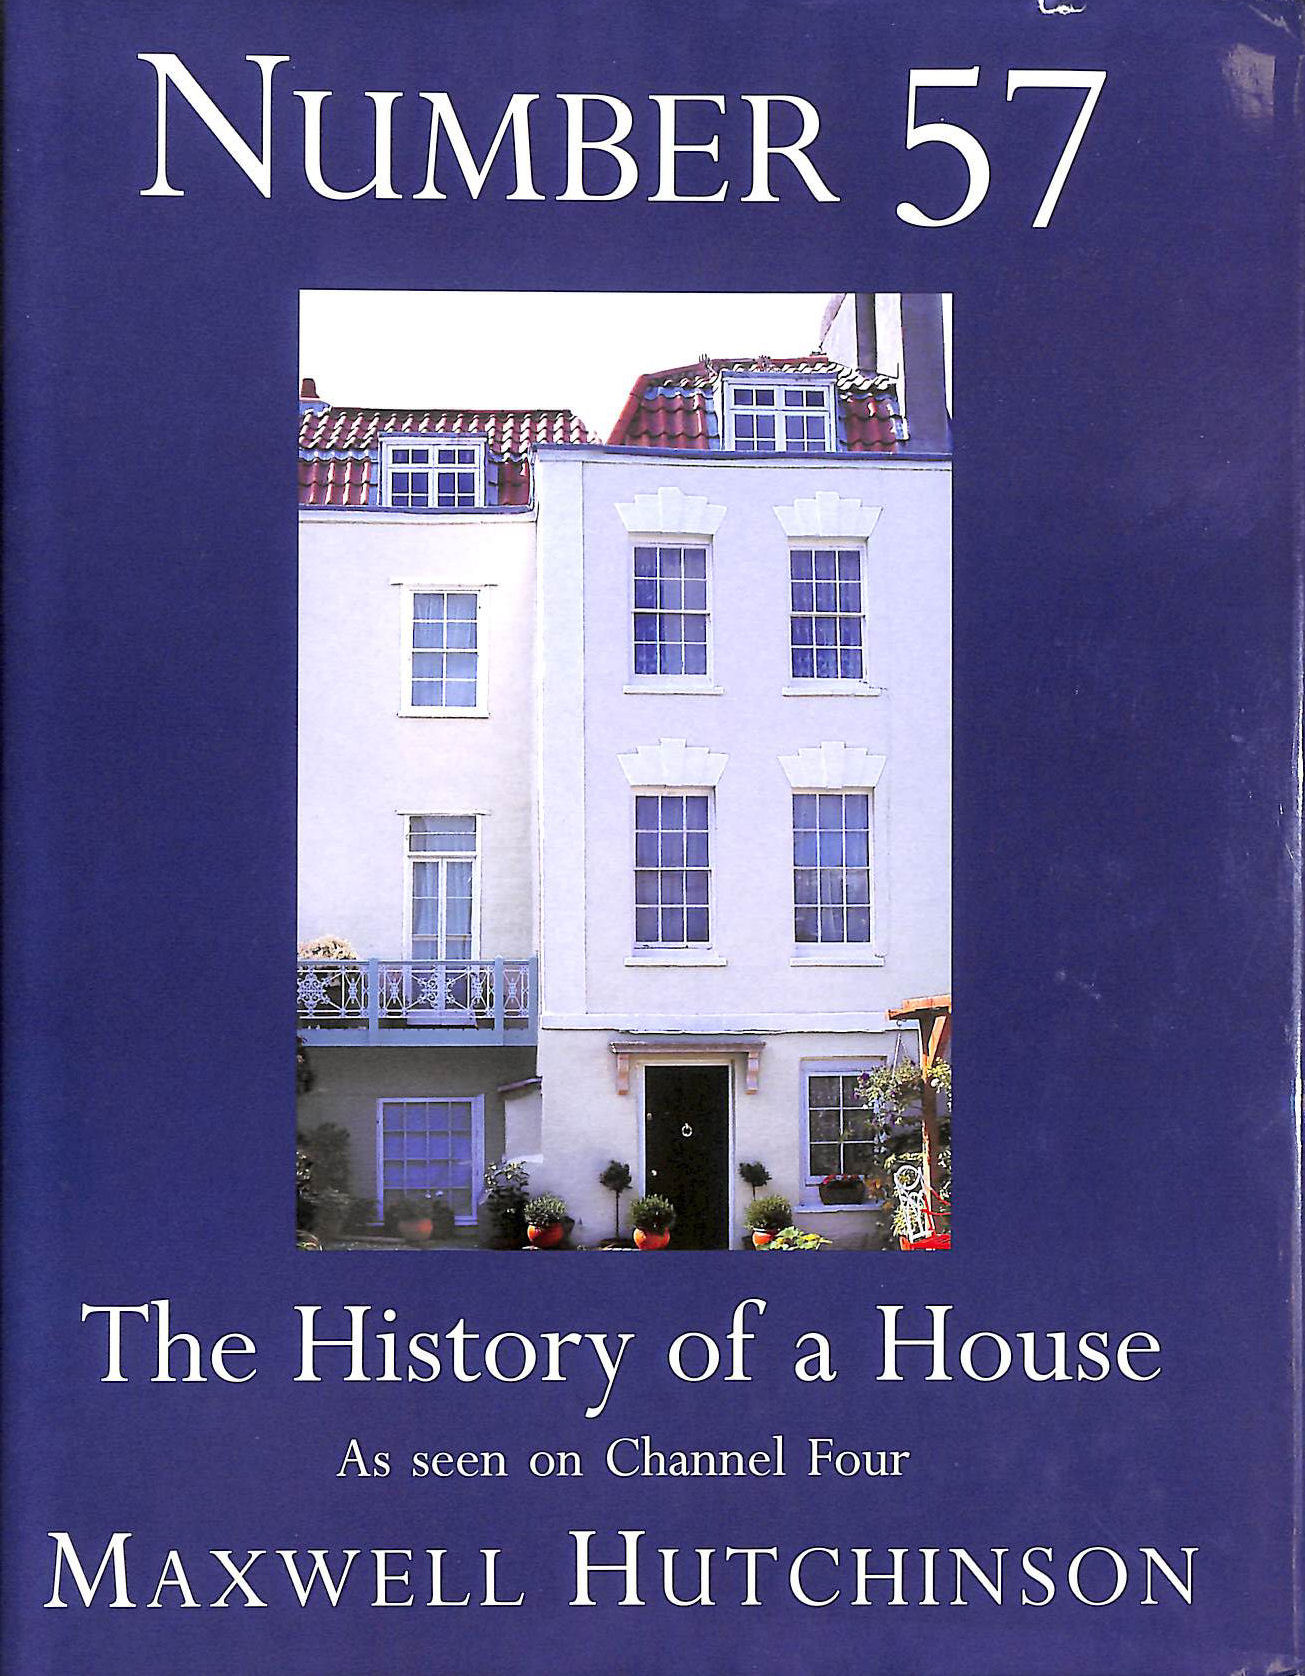 HUTCHINSON, MAXWELL - Number 57: The History of a House